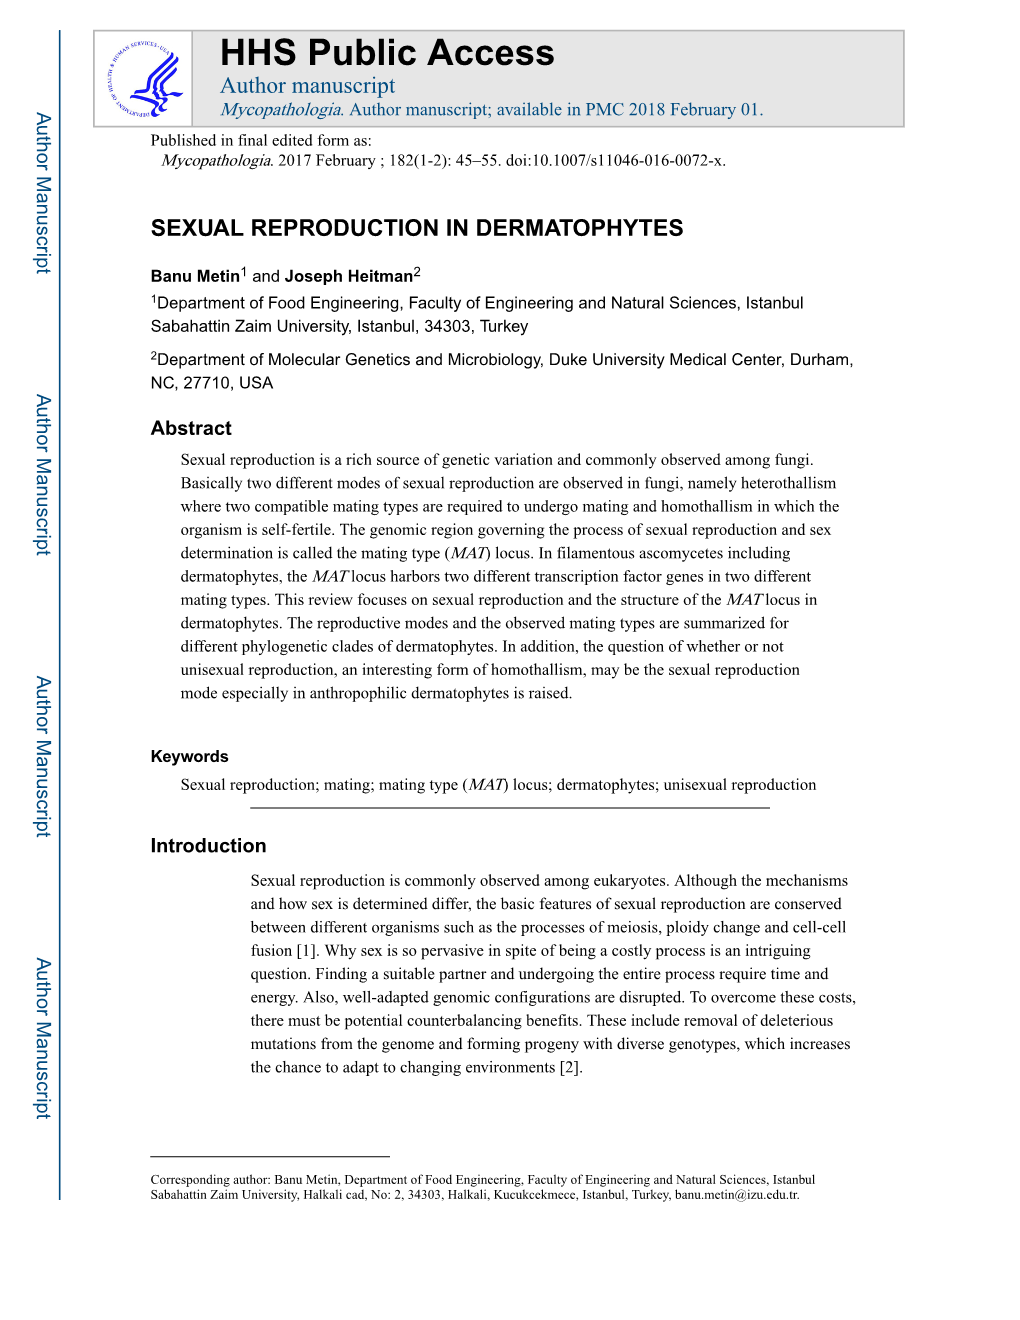 Sexual Reproduction in Dermatophytes